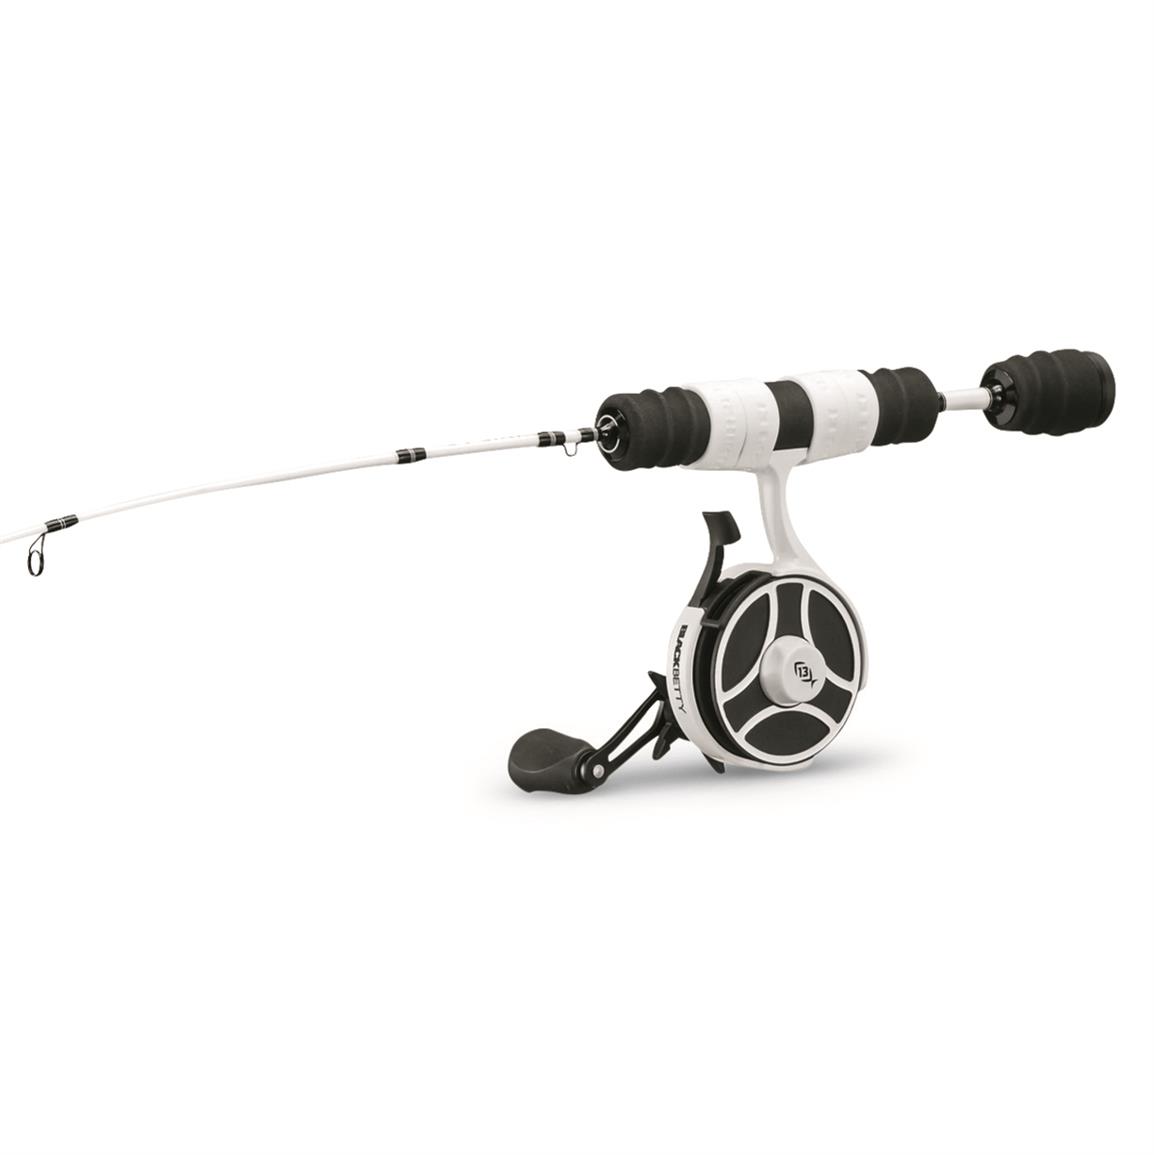 NEW Clam Dave Genz Spring Bobber 27" M Ice Fishing Combo 10681 